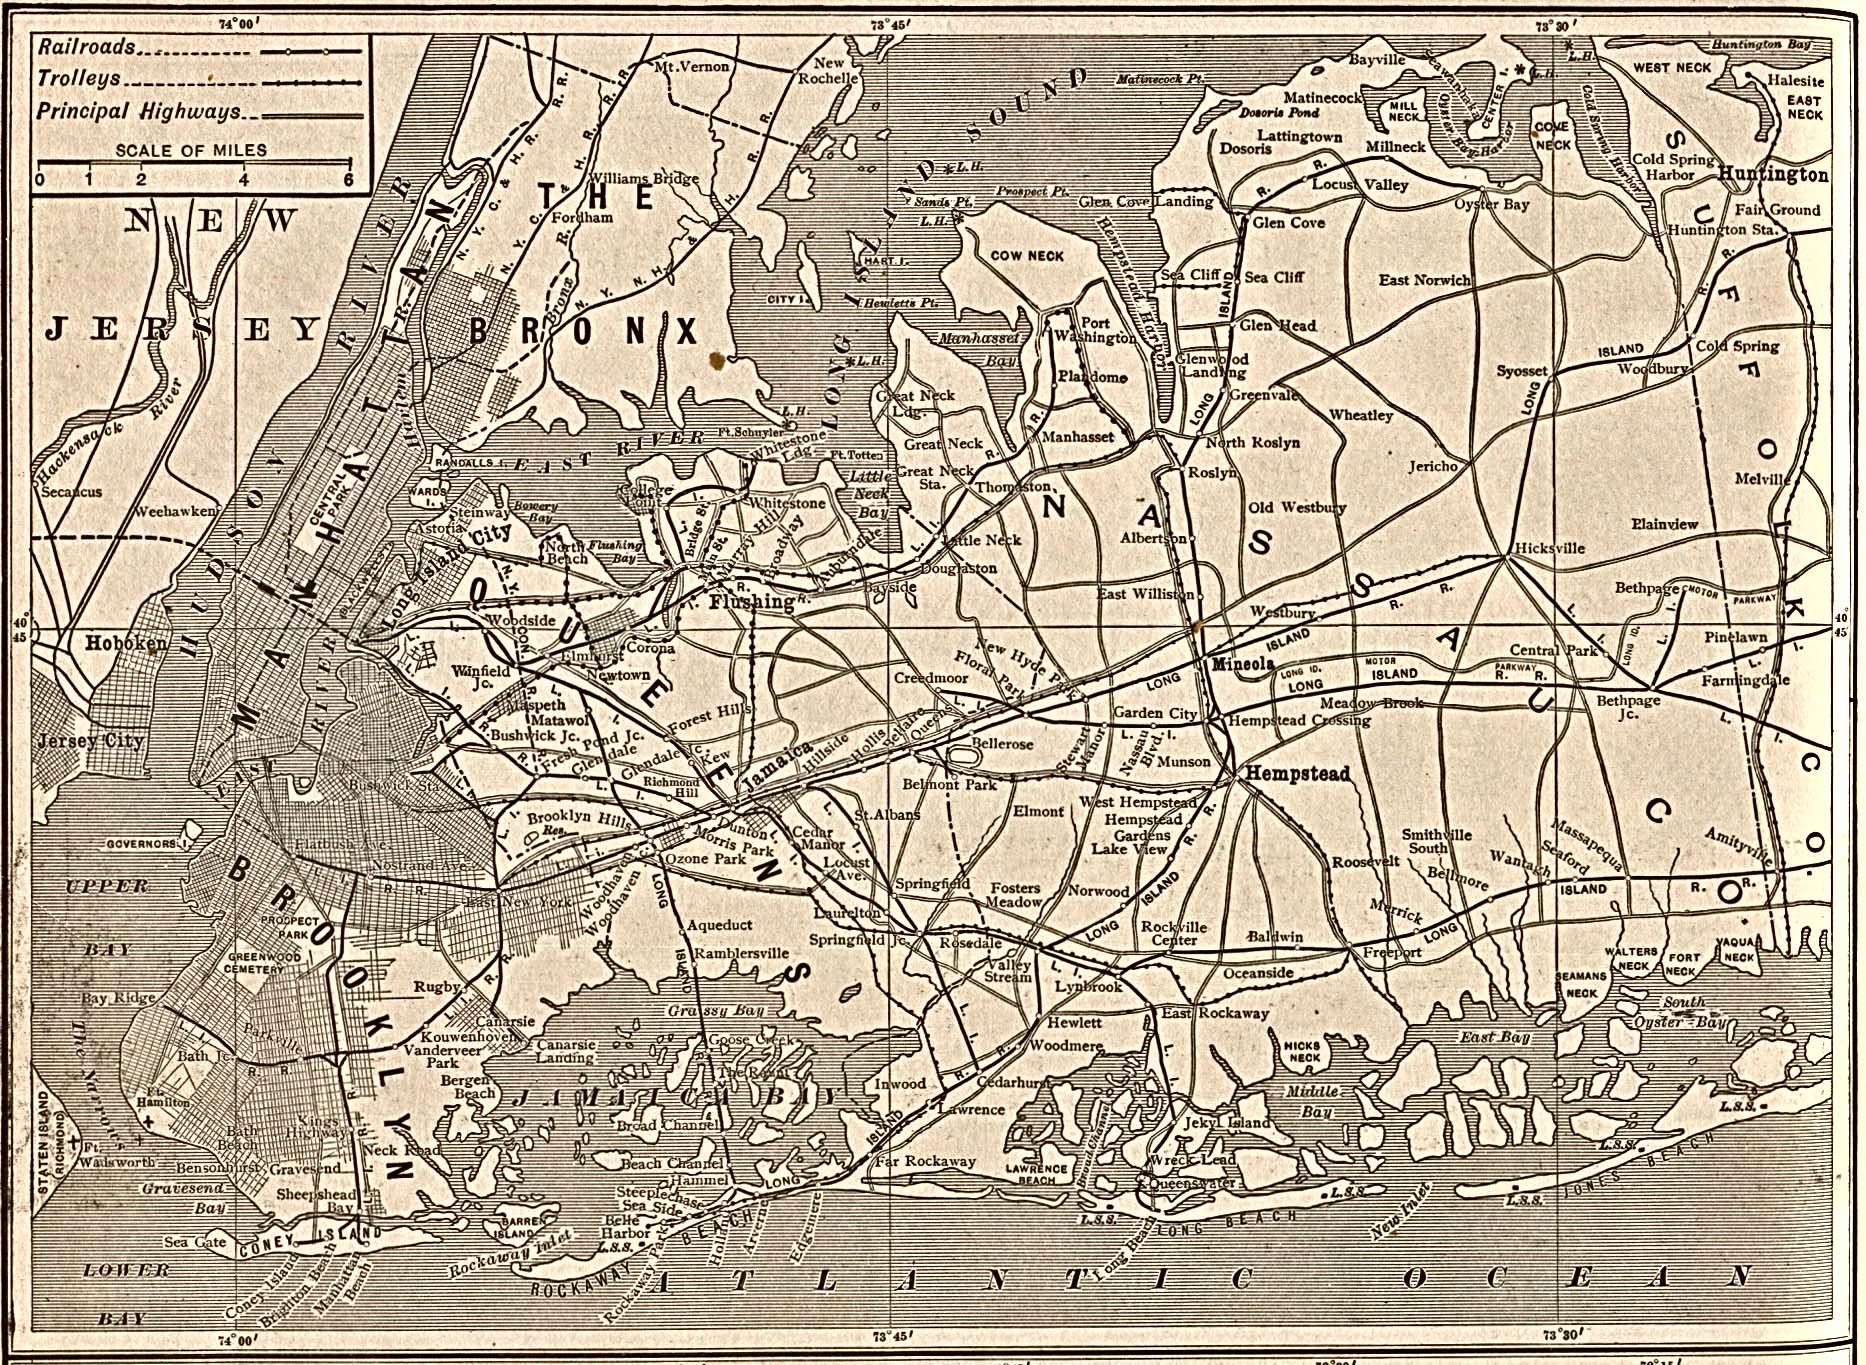 Historical Maps of U.S Cities. New York City, New York 1917 The New Encyclopedic Atlas and Gazetteer of the World. New York: P.F. Collier & Son, 1917 (893K) 